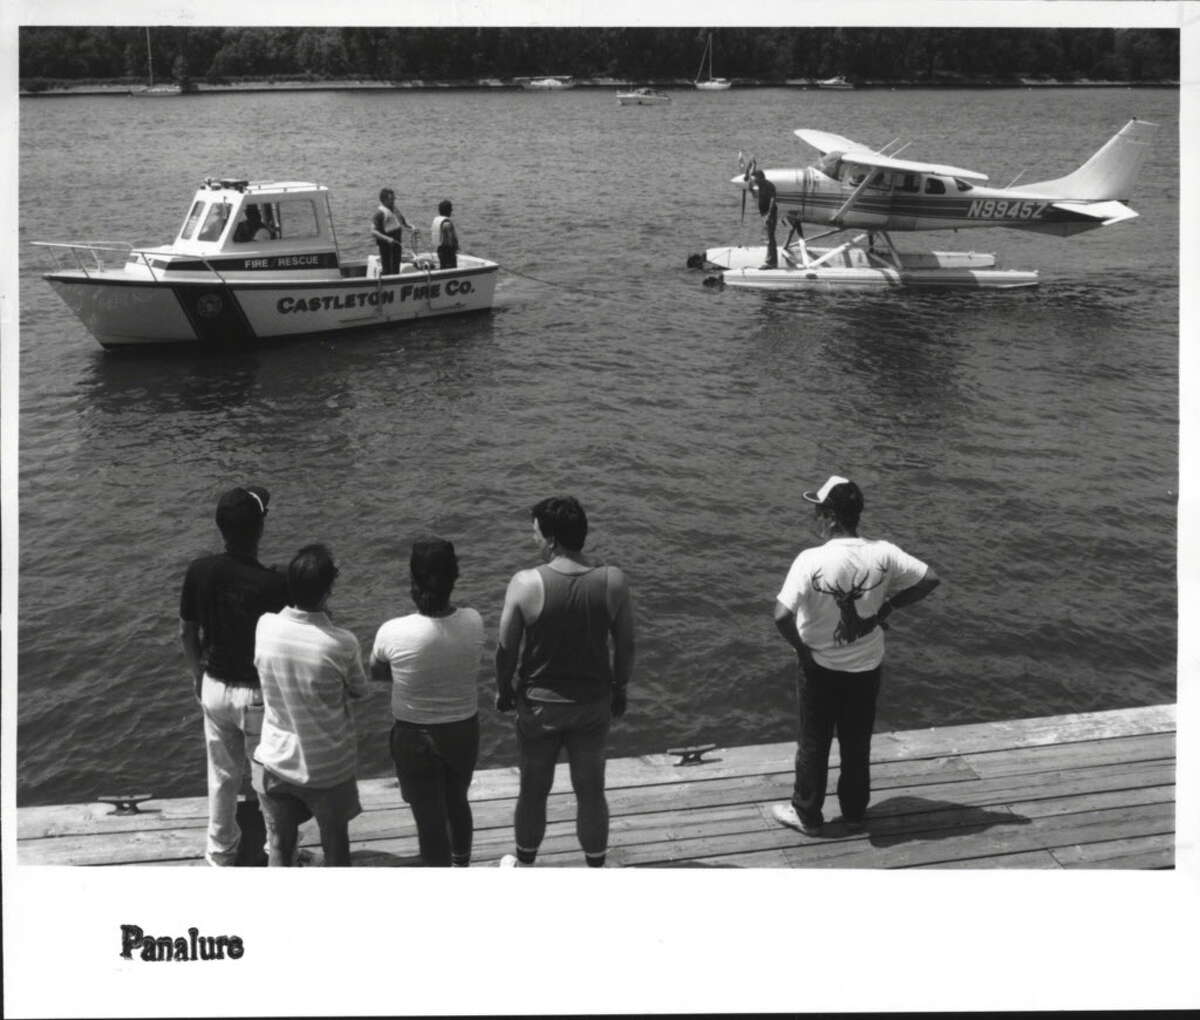 A single-engine airplane that made emergency landing in Hudson River is towed to shore in Castlieton on July 20, 1992.